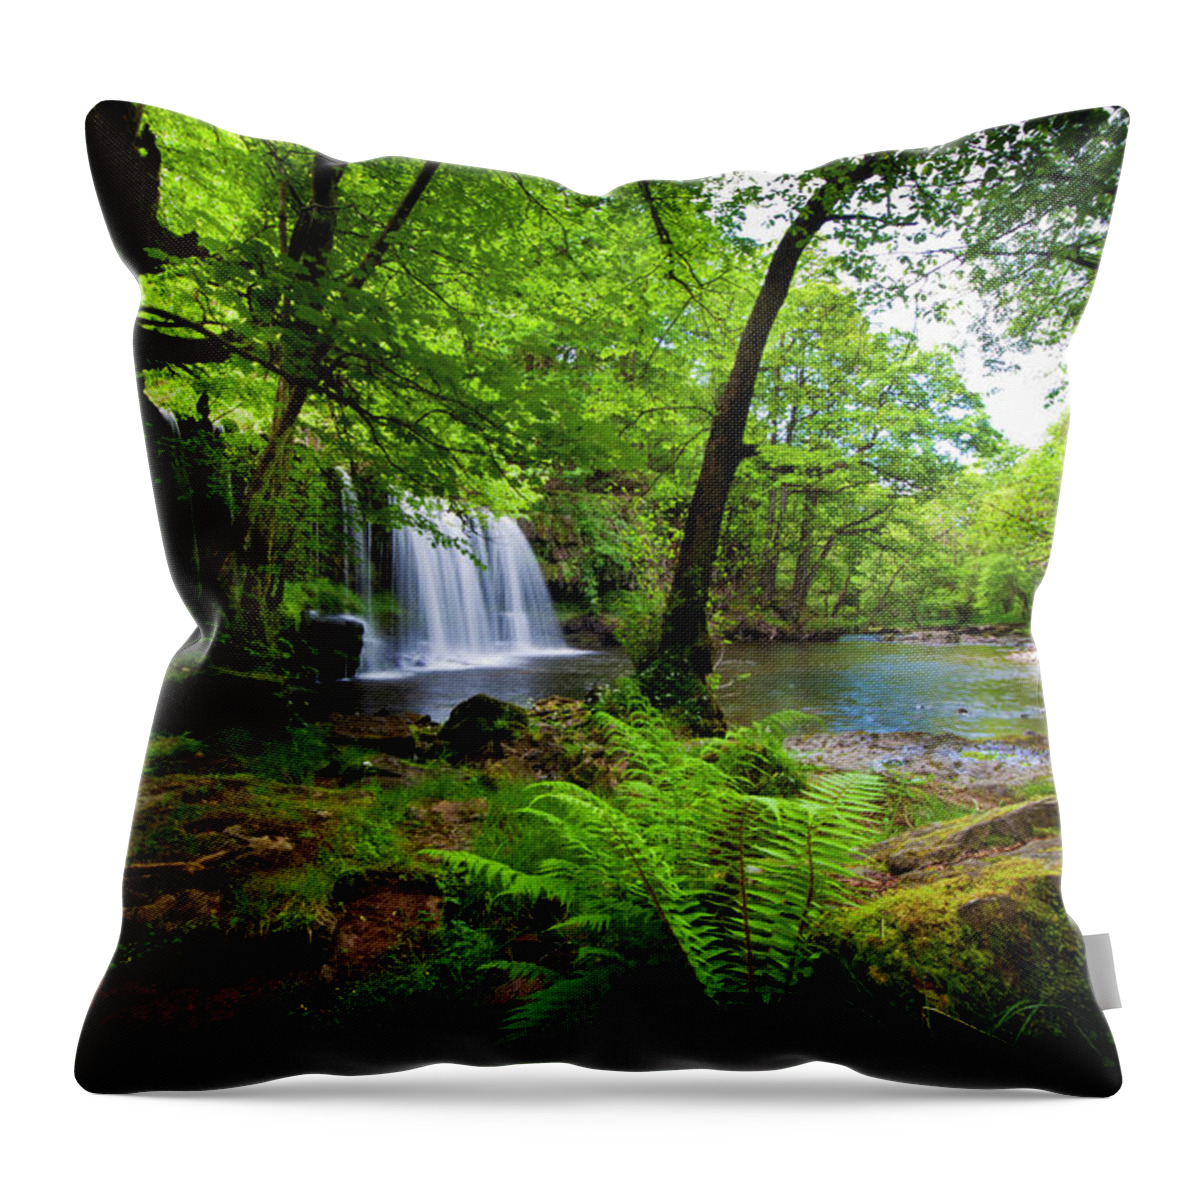 Tropical Rainforest Throw Pillow featuring the photograph Tropical Waterfall by Clive Rees Photography